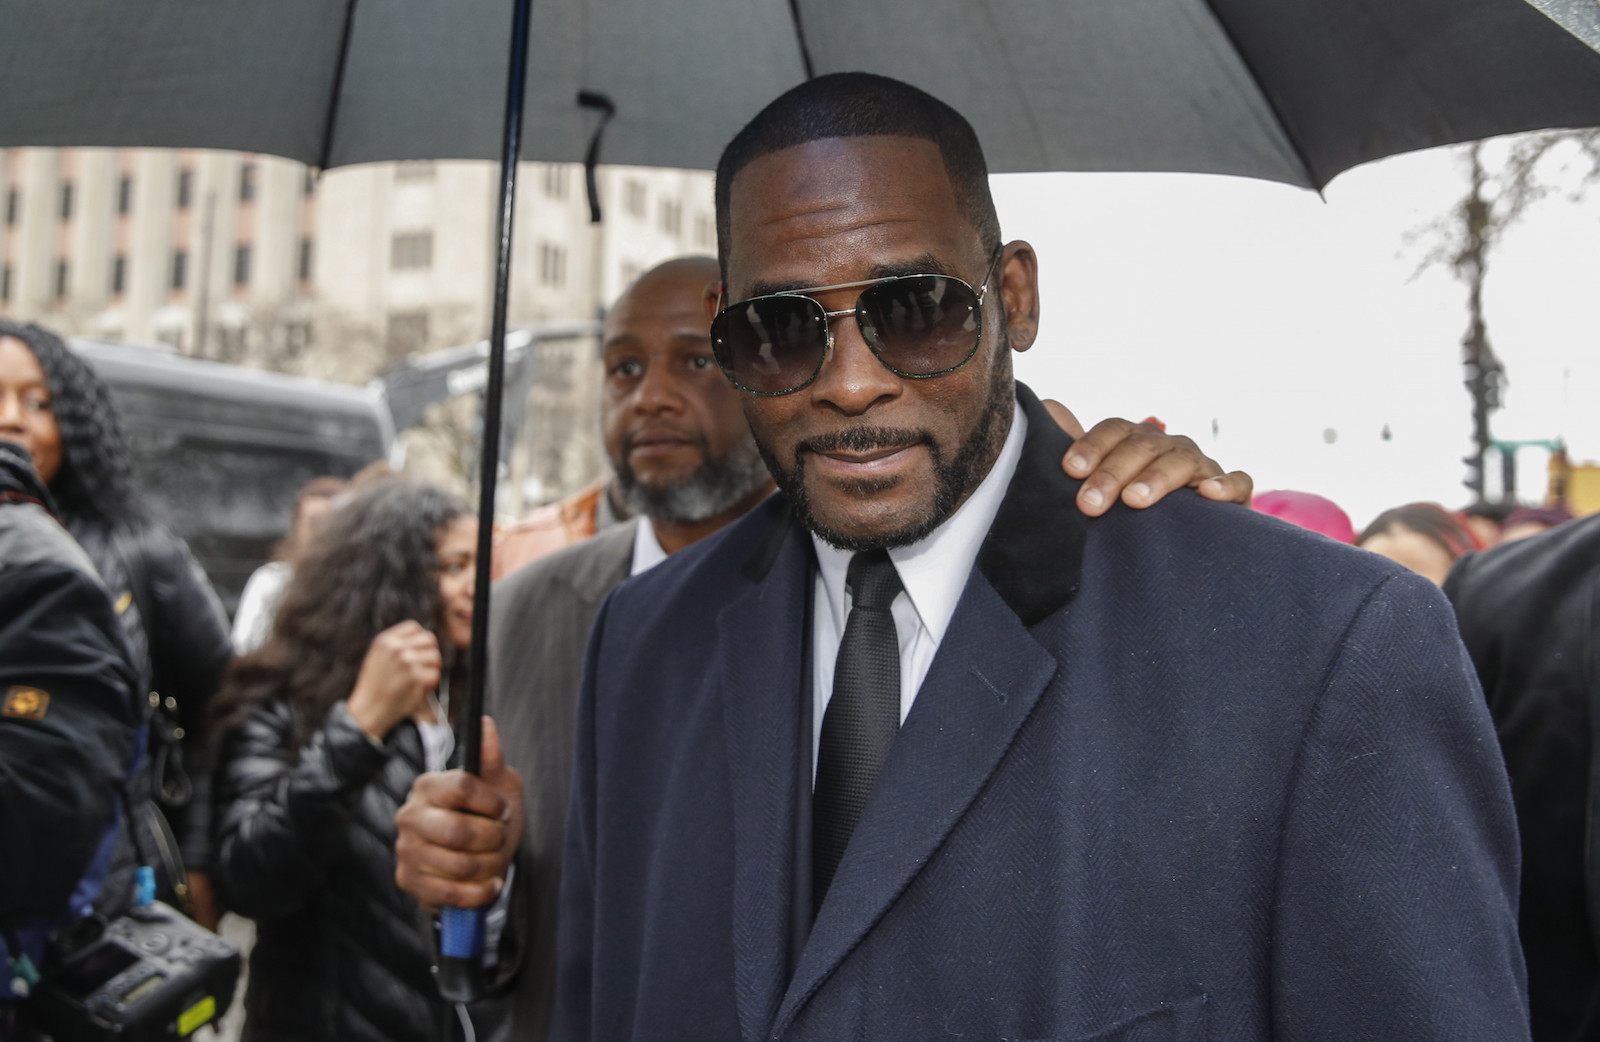 Even though R. Kelly is awaiting his trial in jail, the latest update proves he still has some fans crying wolf, claiming Kelly is innocent. 